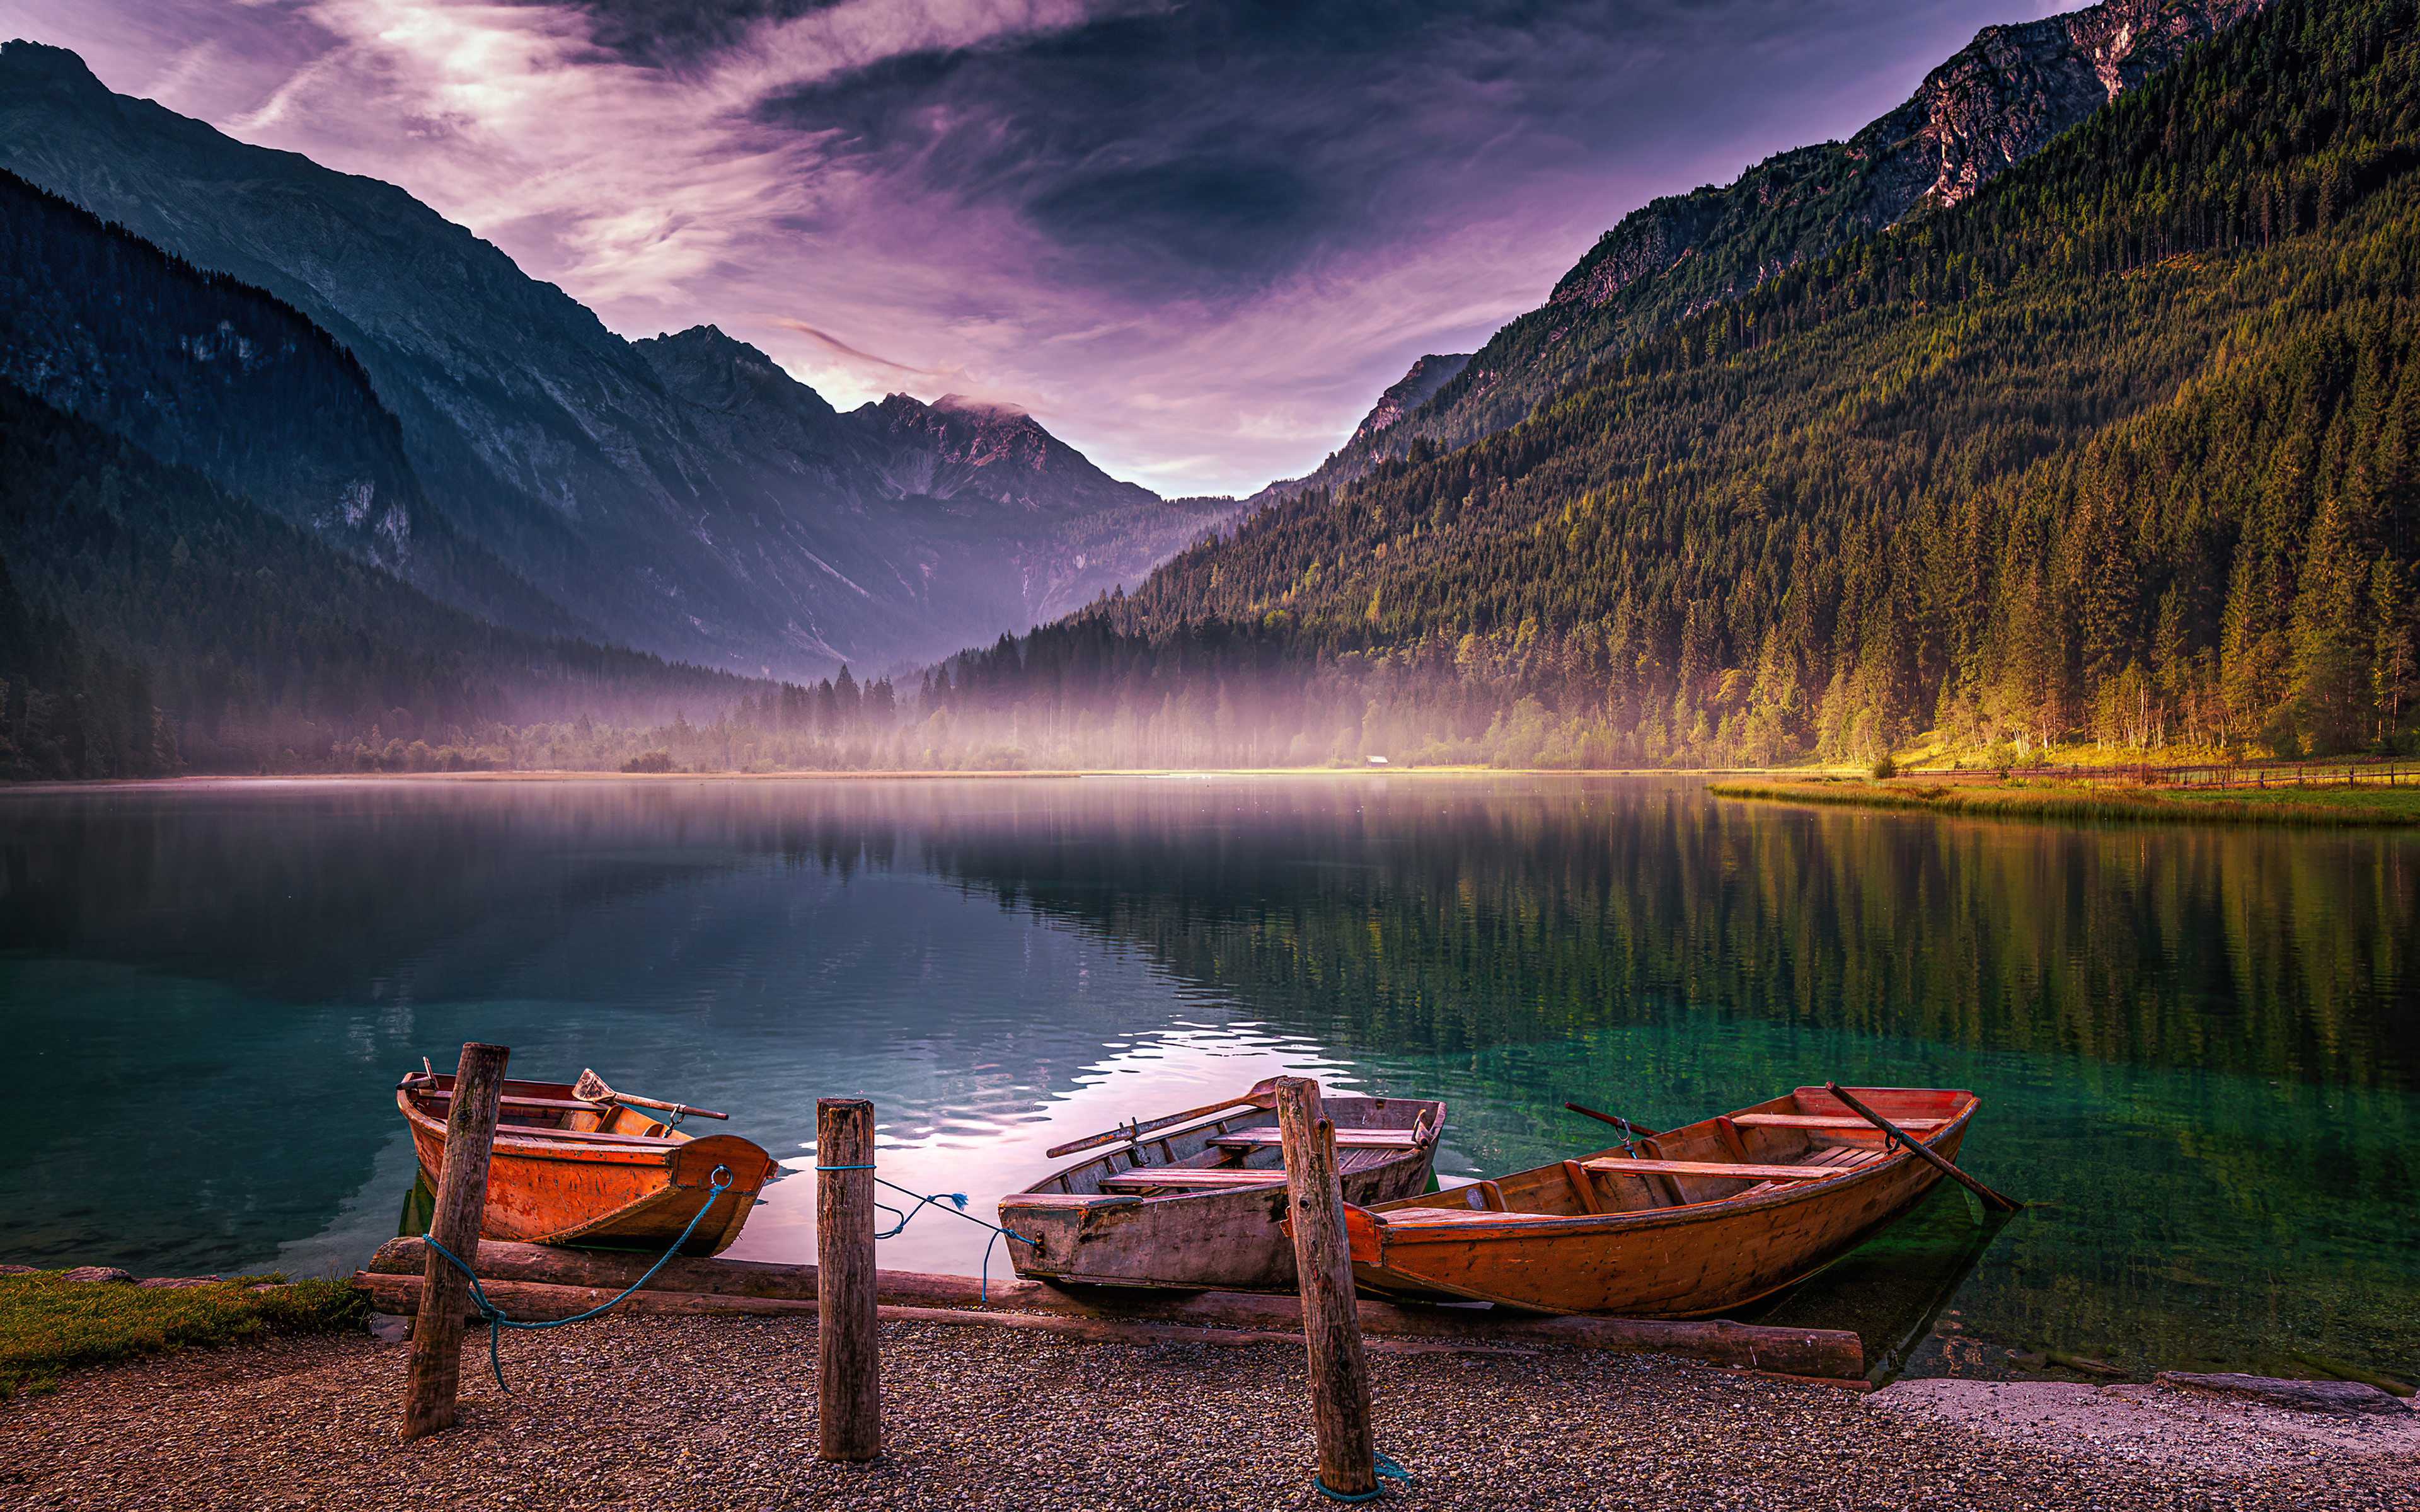 Wooden boats on the lake shore